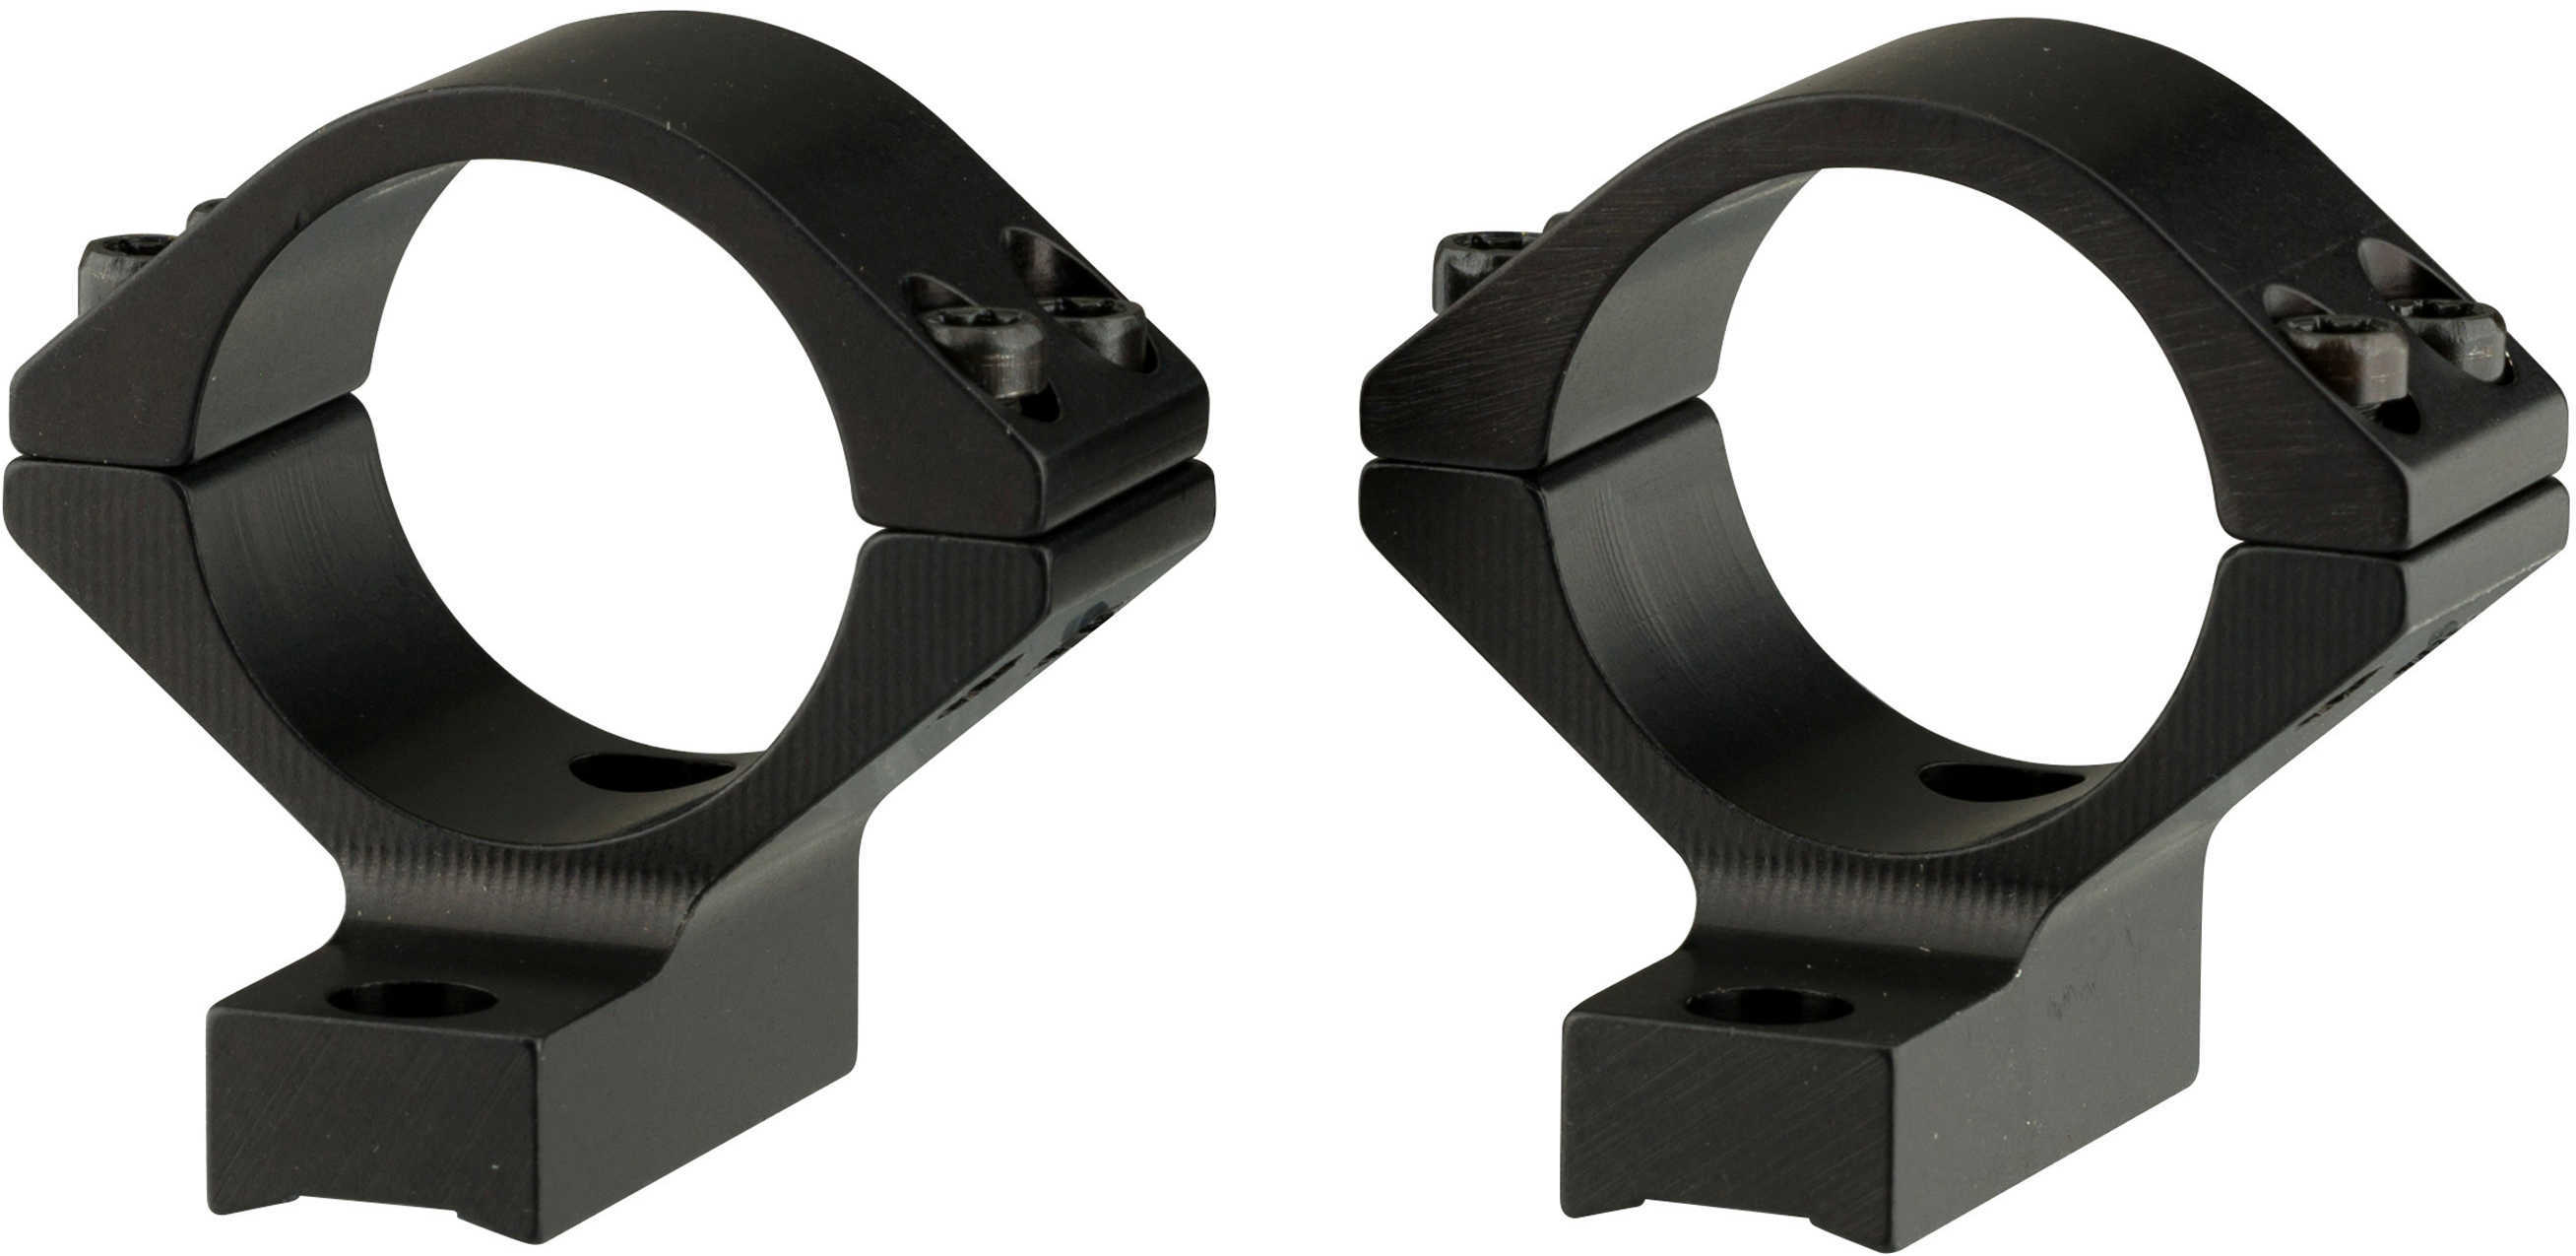 Browning AB3 Integrated Scope Mount System 30mm Ring Diameter High Height Matte Black Md: 123013